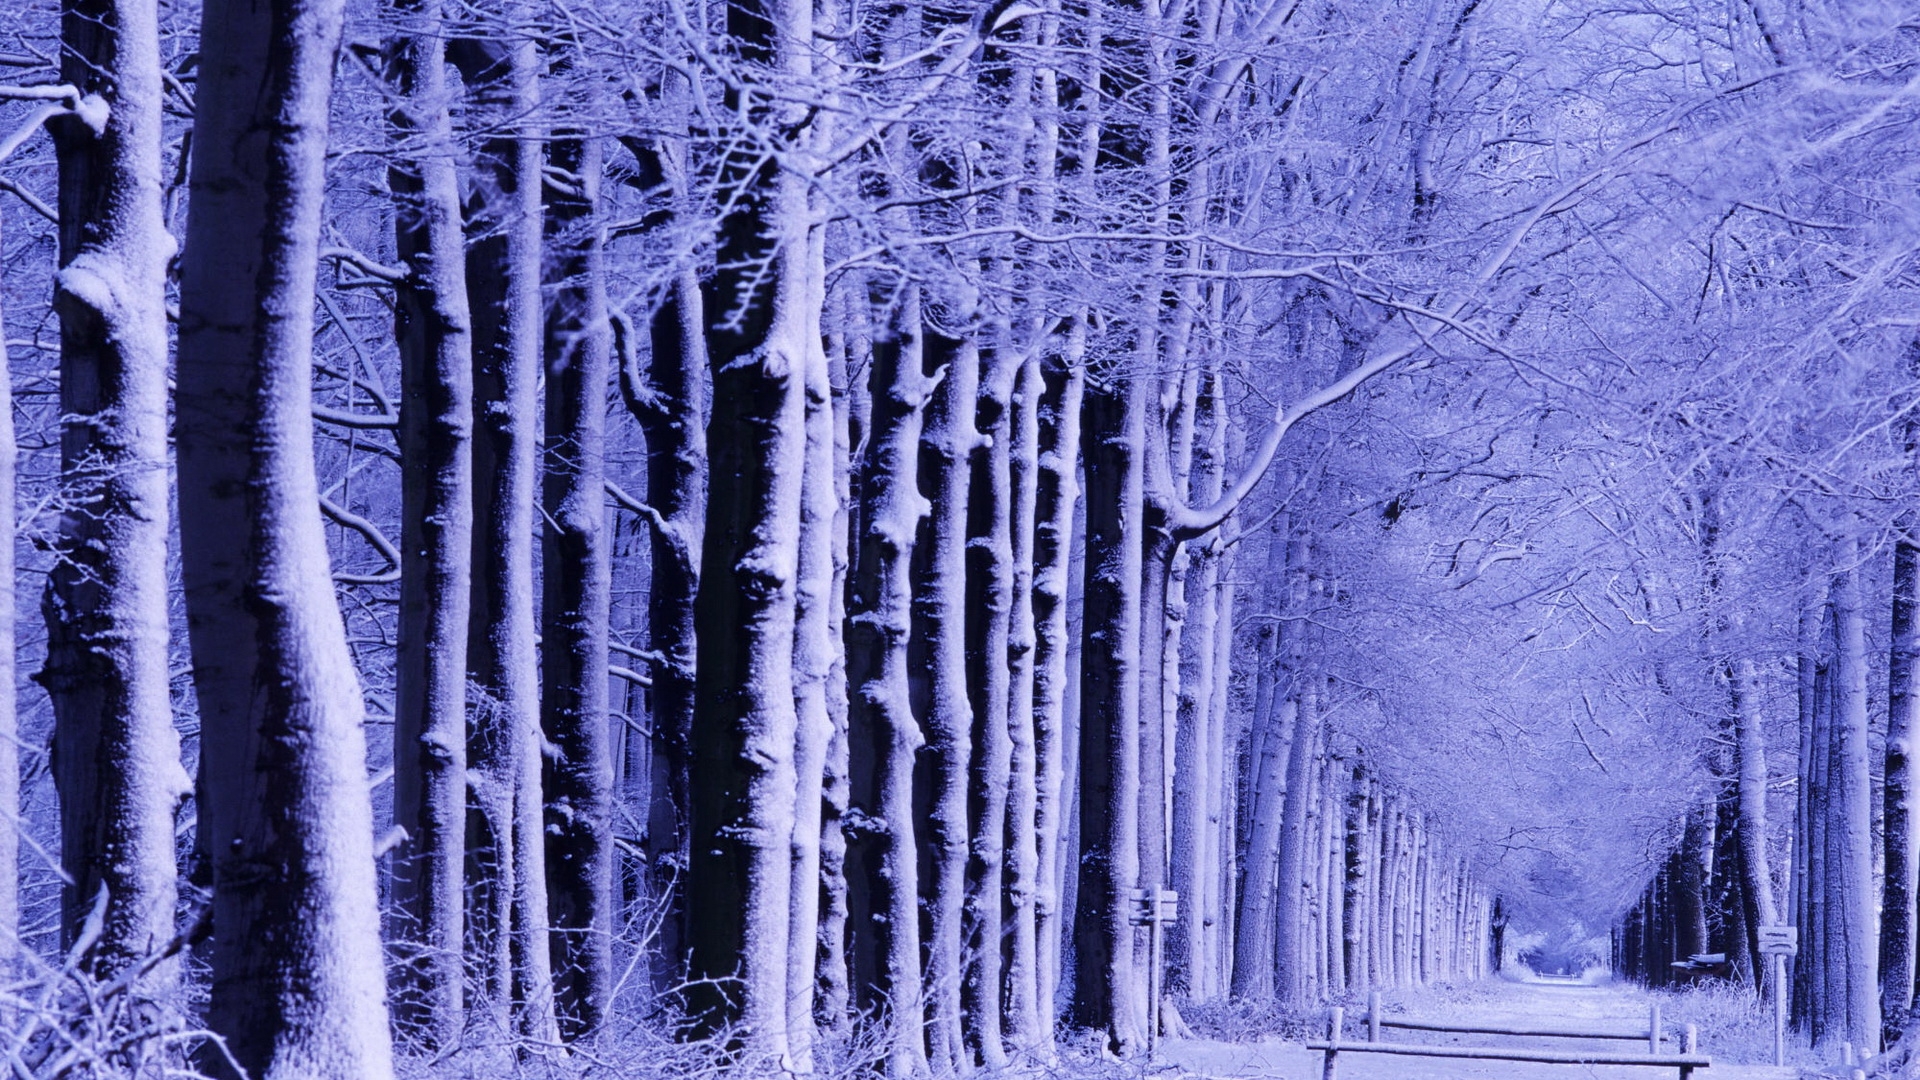 Wallpaper, trees, sky, park, snow, winter, purple, branch, ice, frost, icicle, hoarfrost, Freezing, birch, tree, shop, computer wallpaper, electric blue 1920x1080